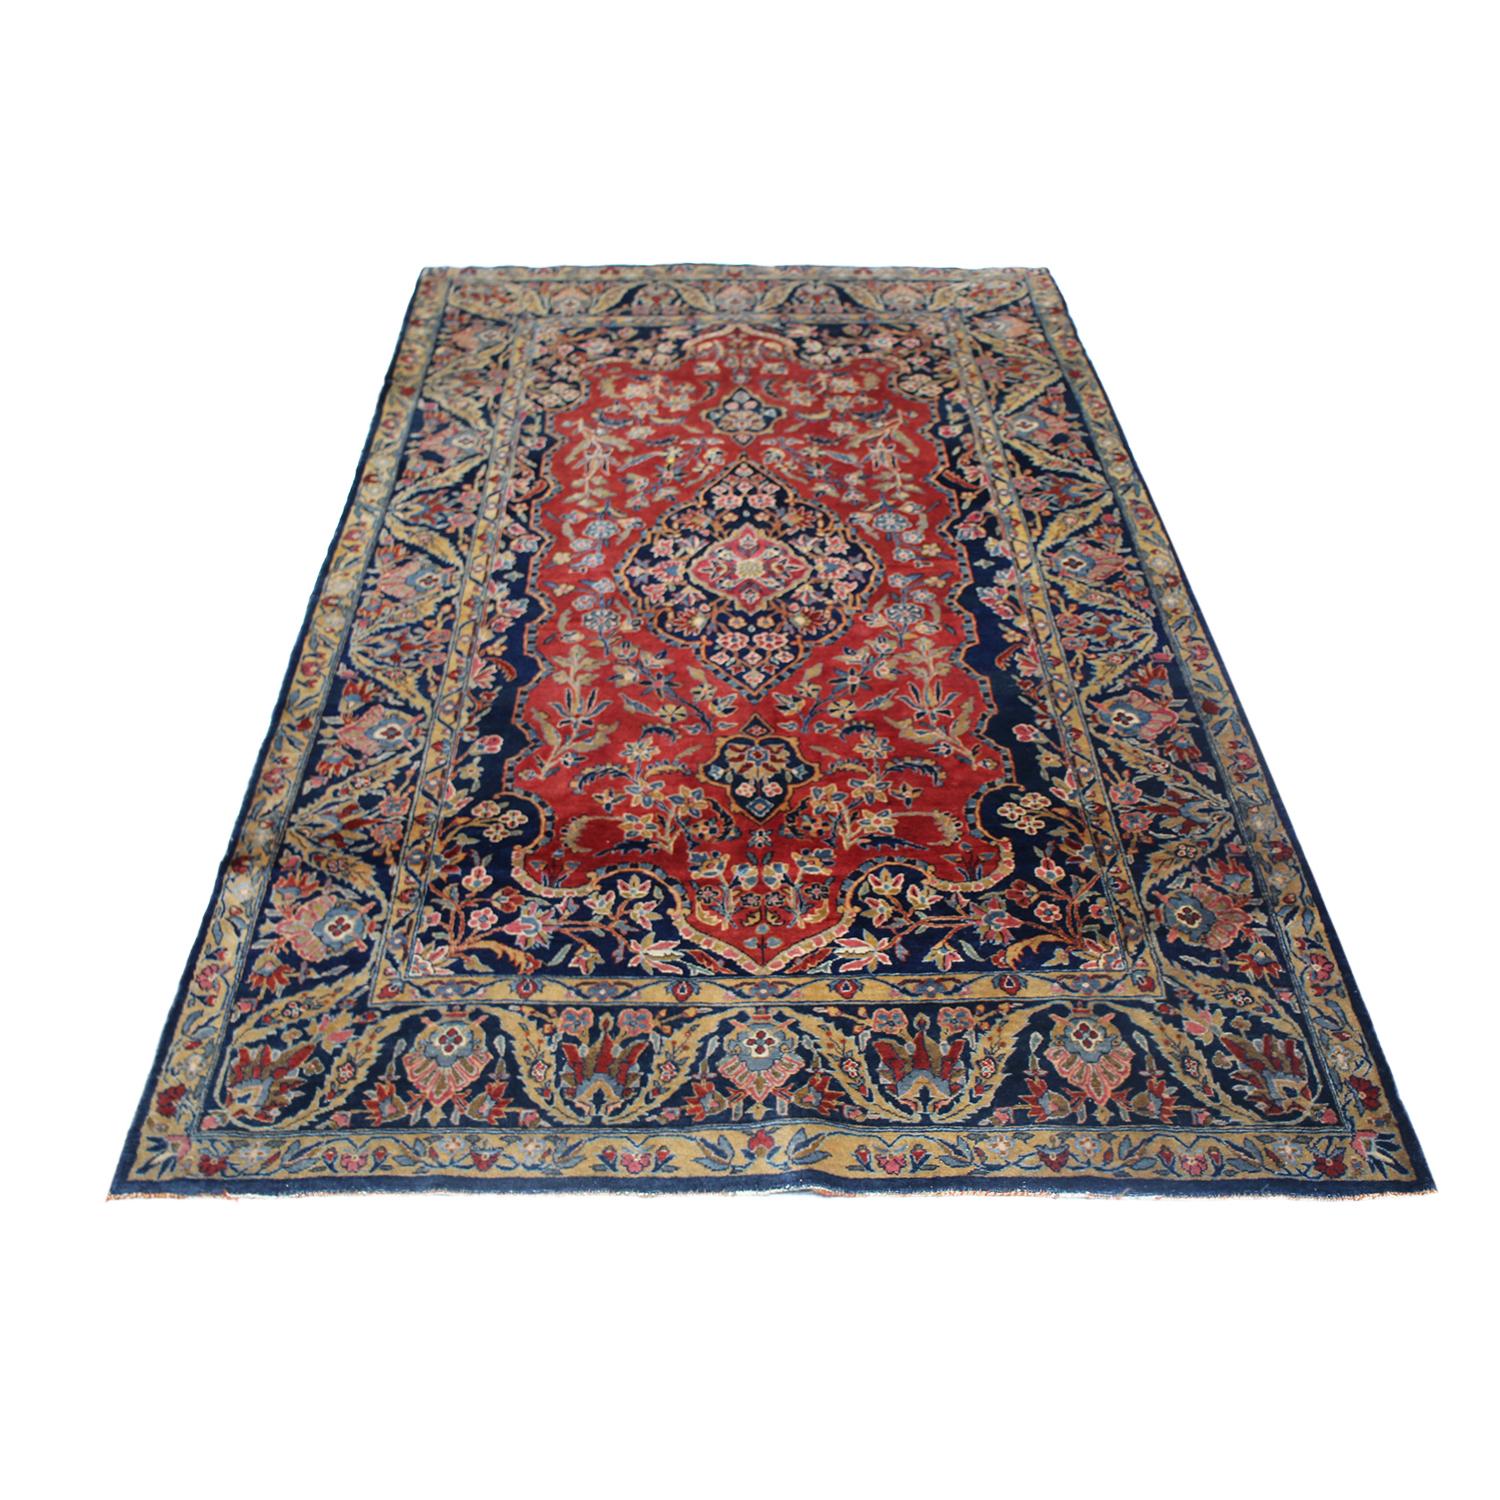 Hand knotted in high-quality wool originating from Persia in 1890, this antique Kashan Persian rug enjoys a particularly uncommon creative depiction of the cypress tree motif in its mirrored wrapping borders, a traditional symbol widely believed to